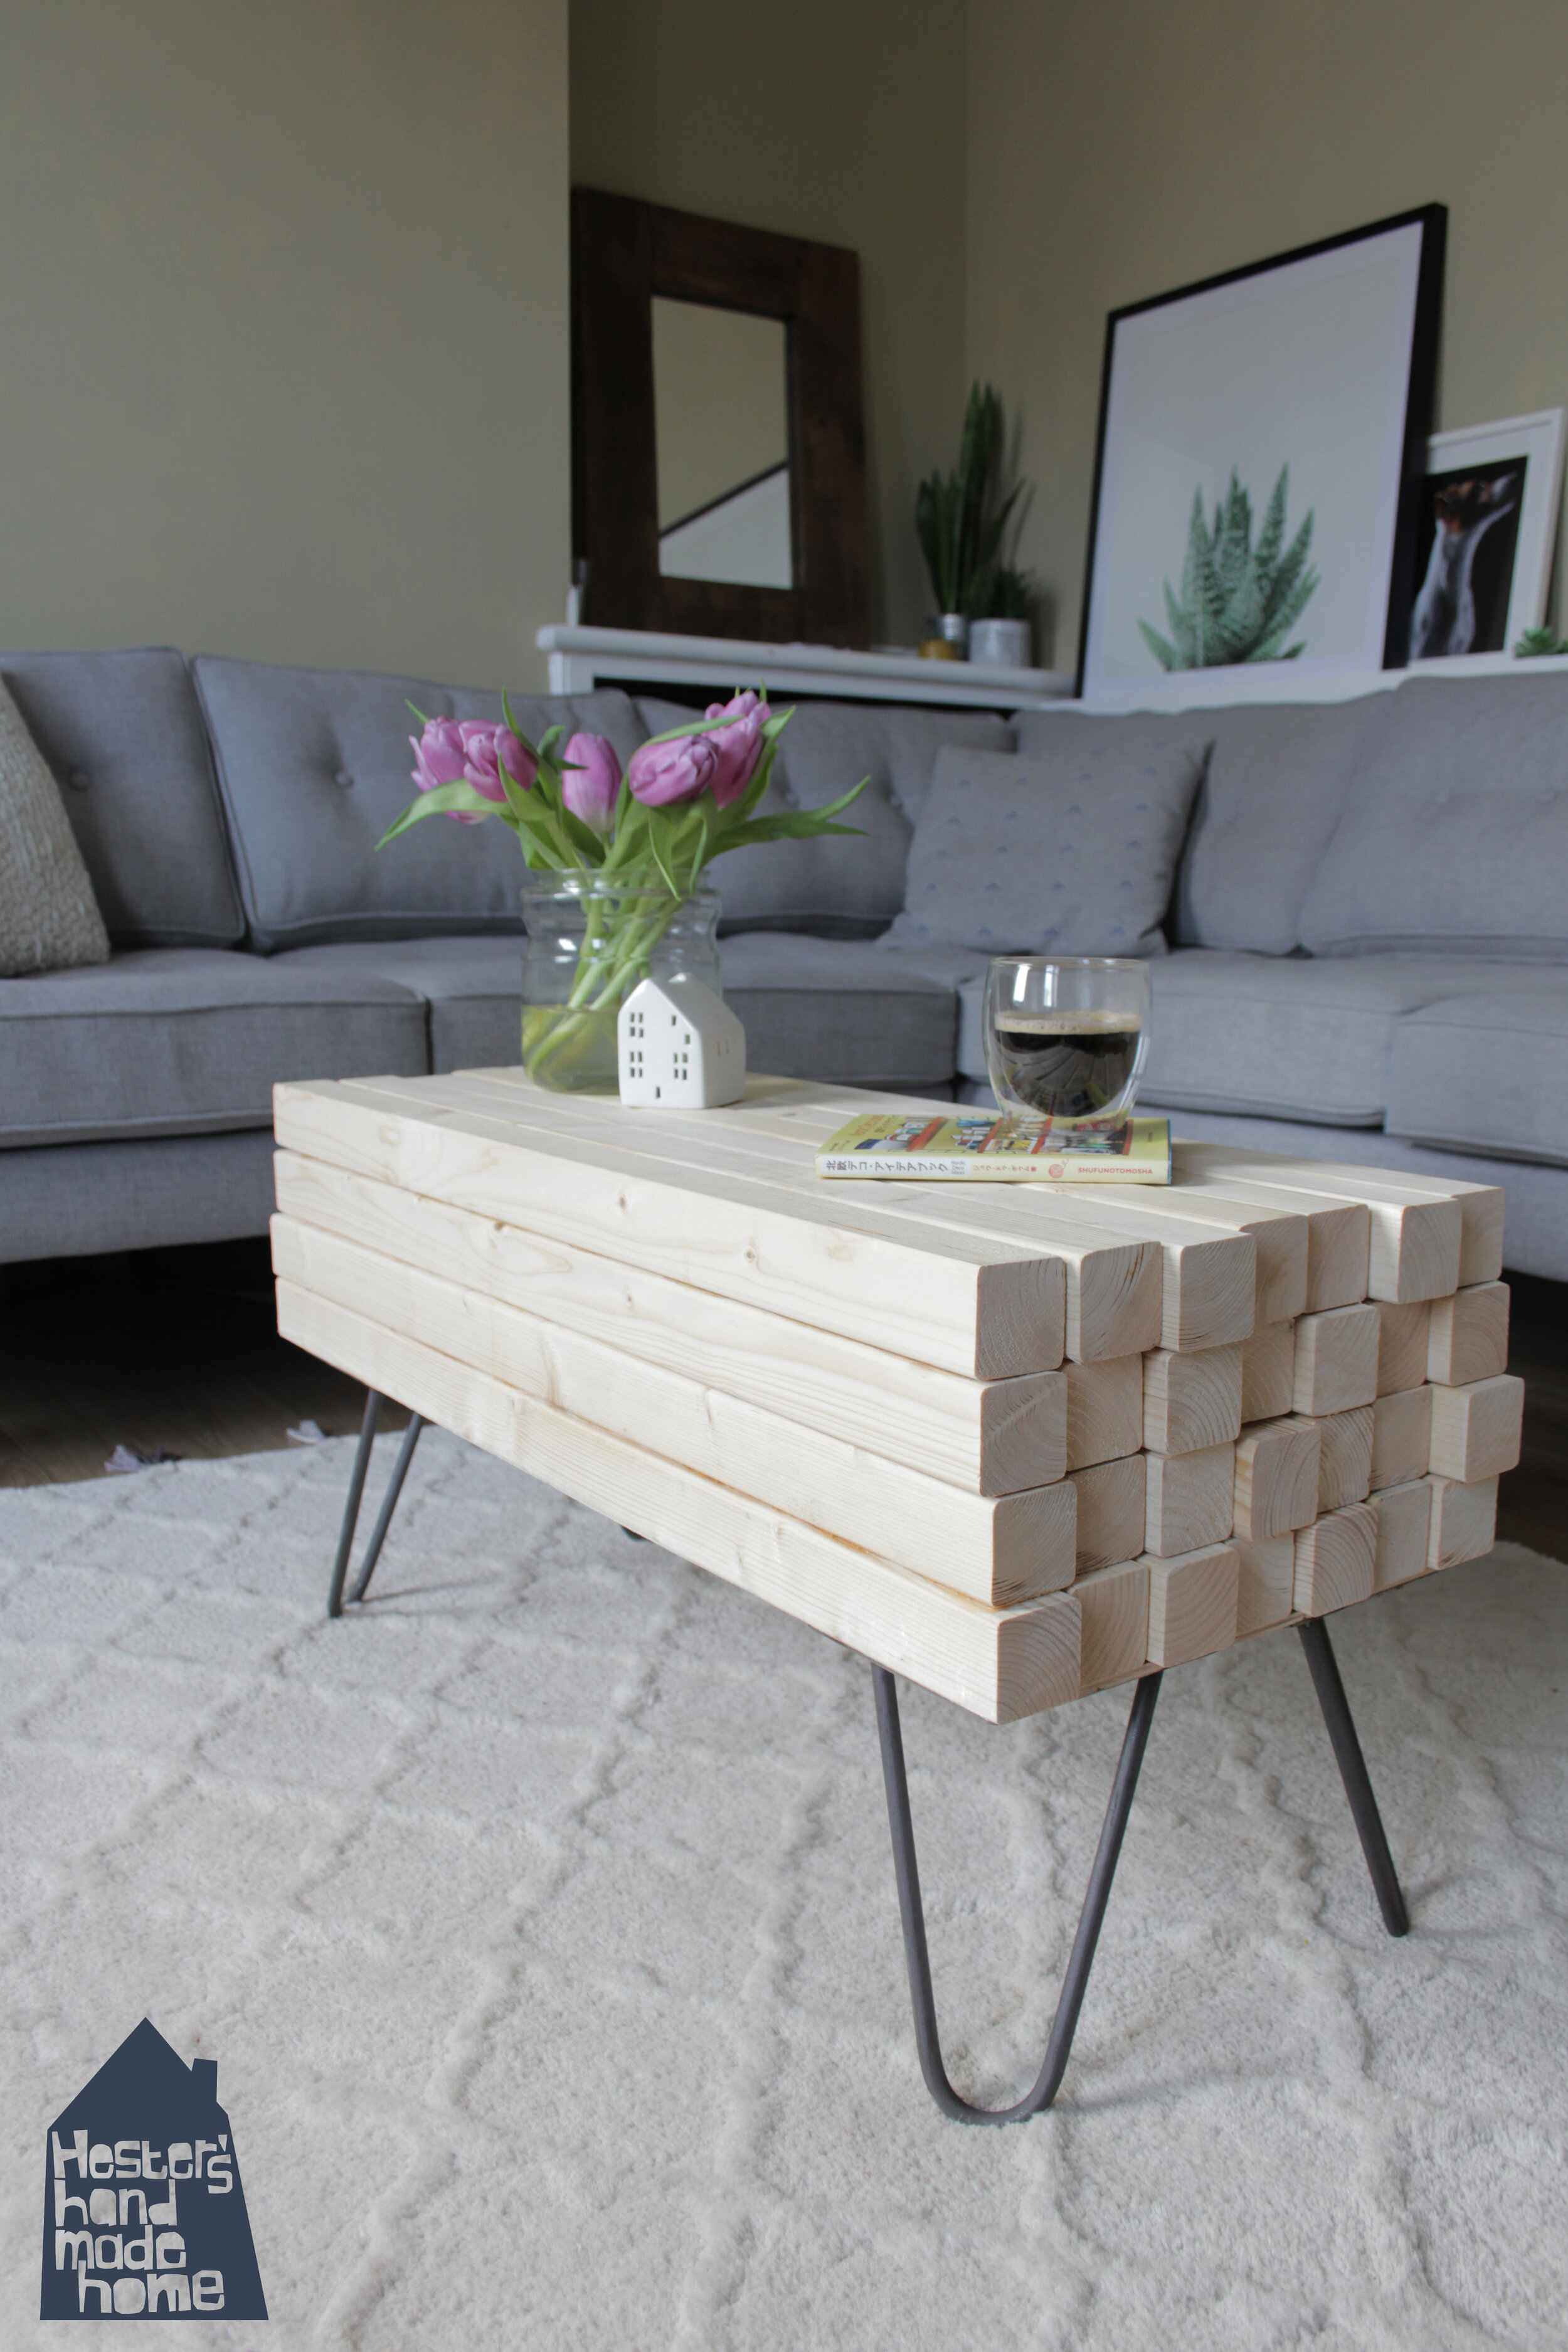 How to upcycle a coffee table â€